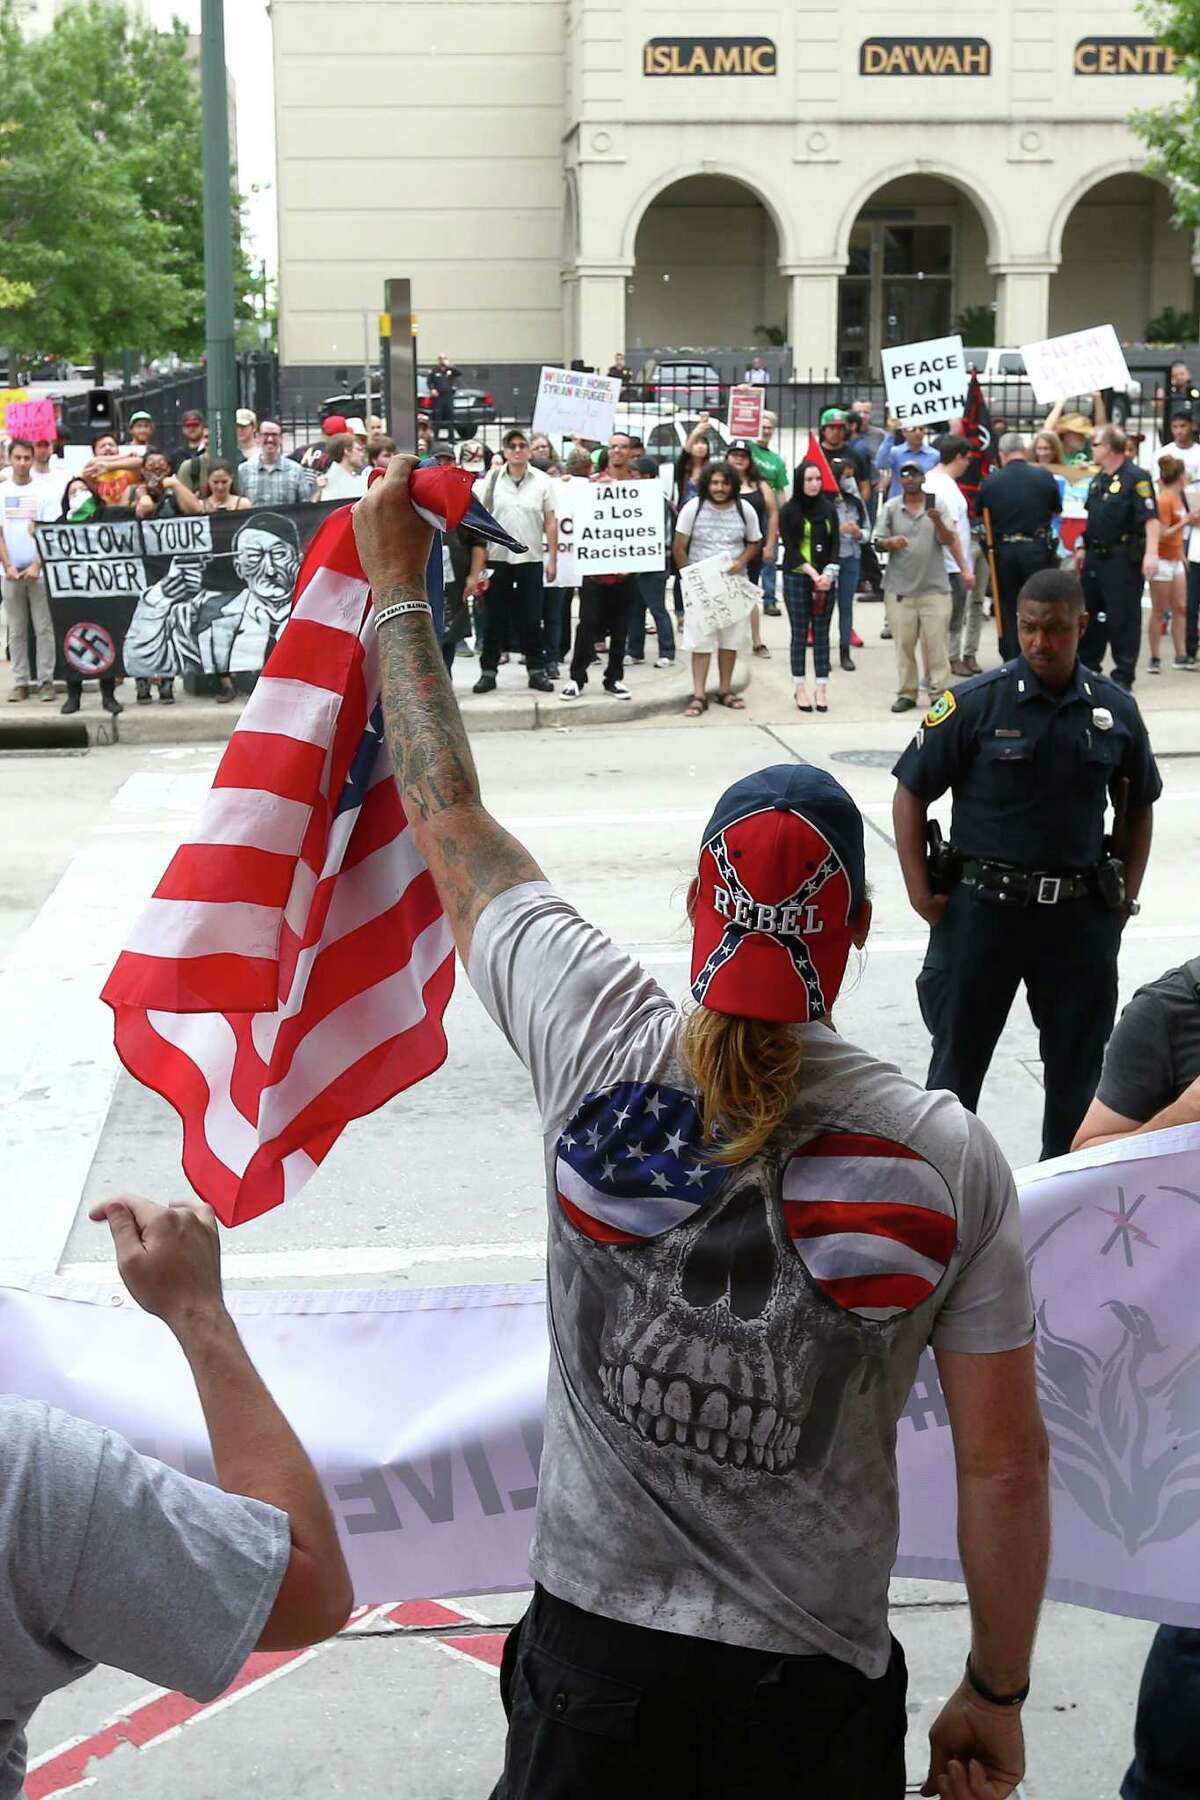 "Show me your patriotism," a protester who referred to himself as "Doug," center, yells at counter-protesters at the Islamic Da'Wah Center, Saturday, May 21, in Houston. "Equality and social justice aren't necessarily a bad thing, but they don't have the interests of the Houston community in mind," he said. "This is the U.S., not Saudi Arabia. This doesn't have anything to do with Texas social justice." ( Jon Shapley / Houston Chronicle )